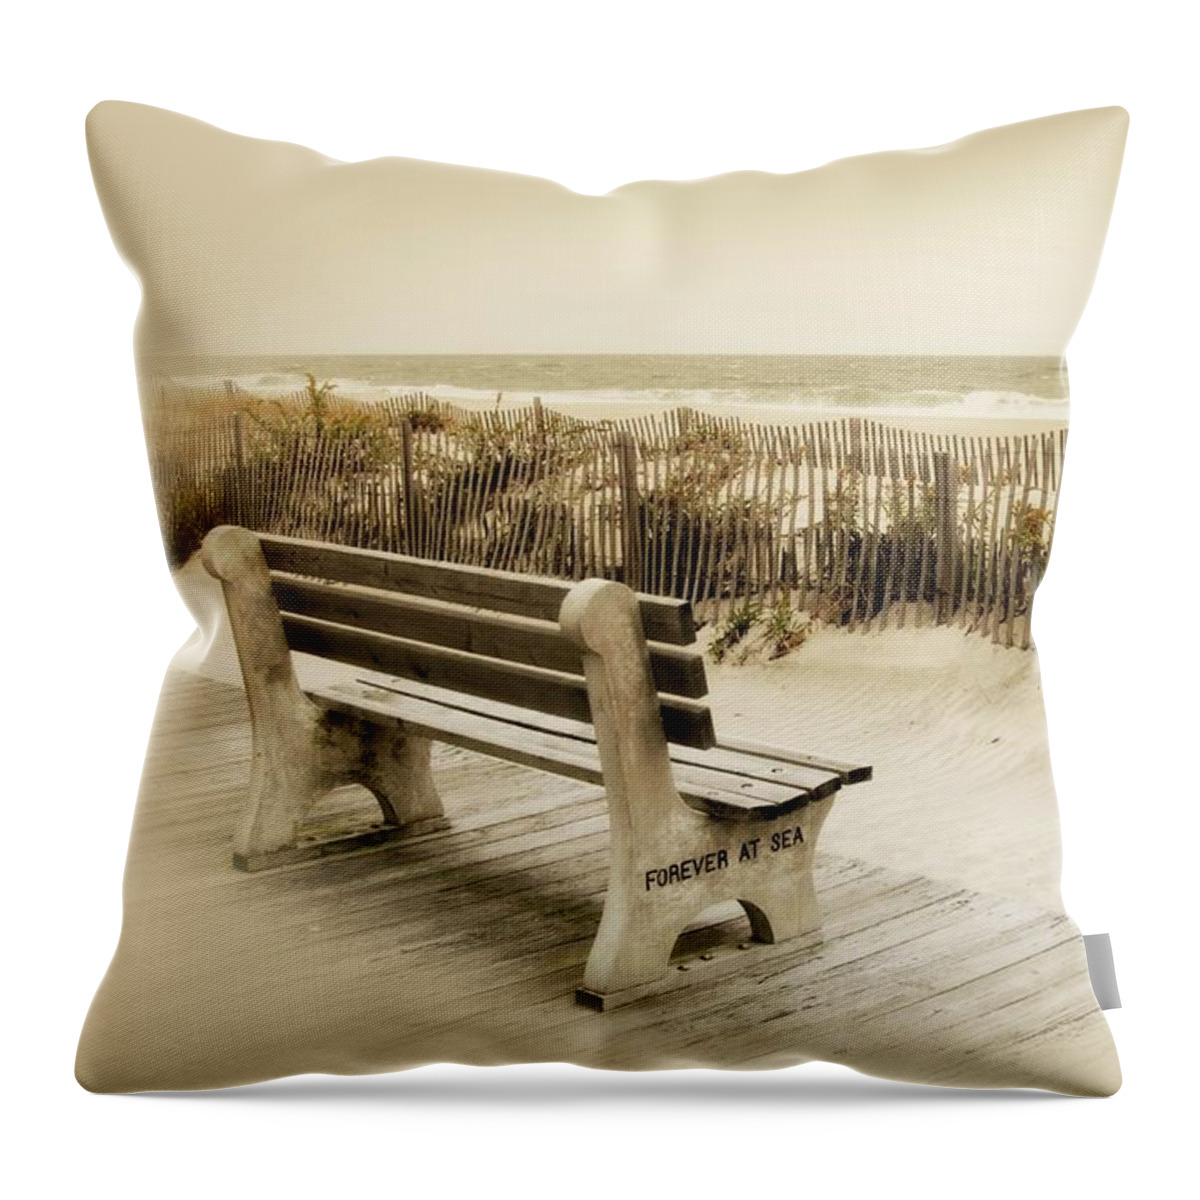 Jersey Shore Throw Pillow featuring the photograph Forever At Sea - Jersey Shore by Angie Tirado